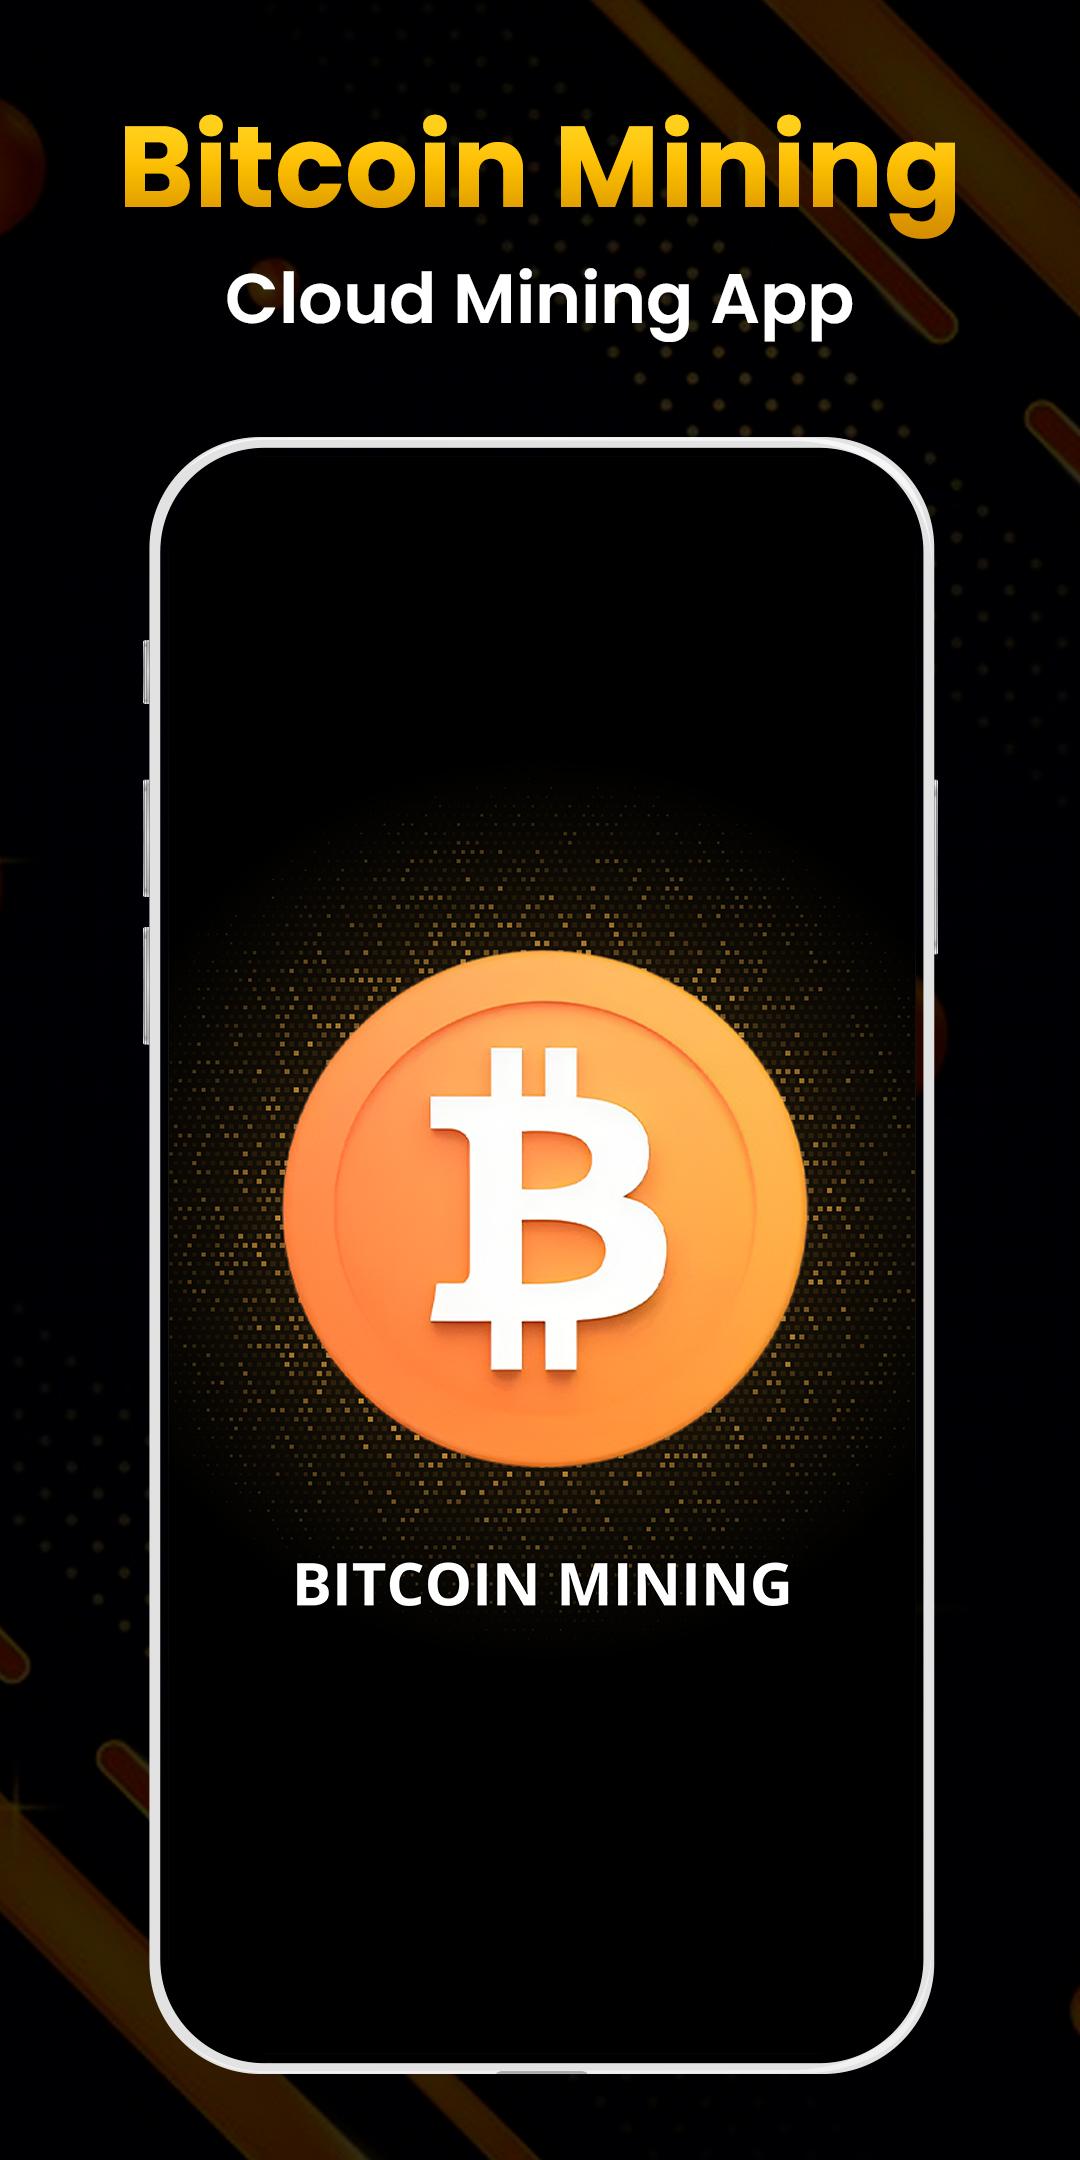 Bitcoin Miner APK Download - Free - 9Apps